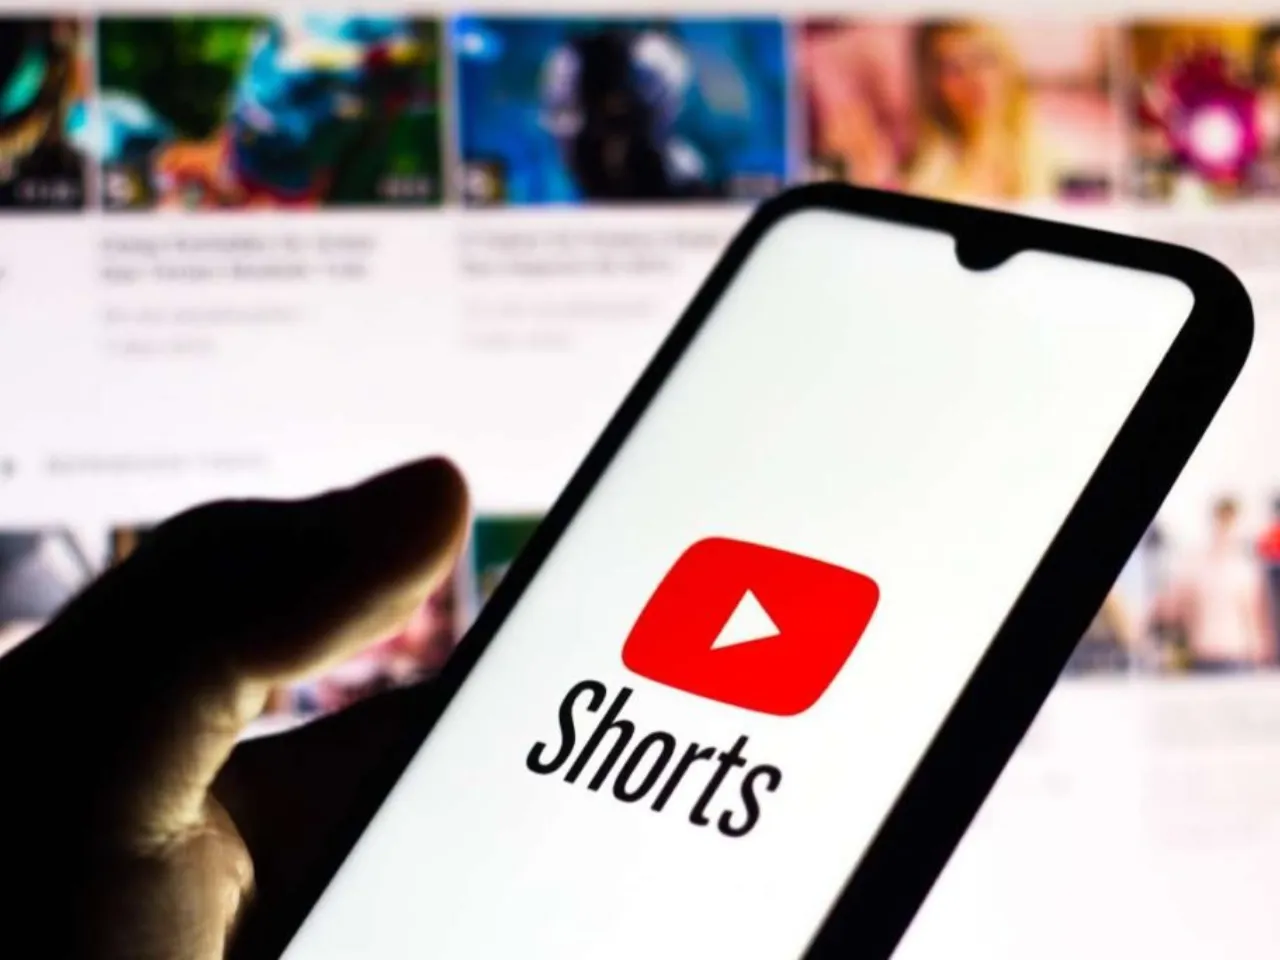 Google DeepMind joins hands to revolutionize the discovery of YouTube Shorts